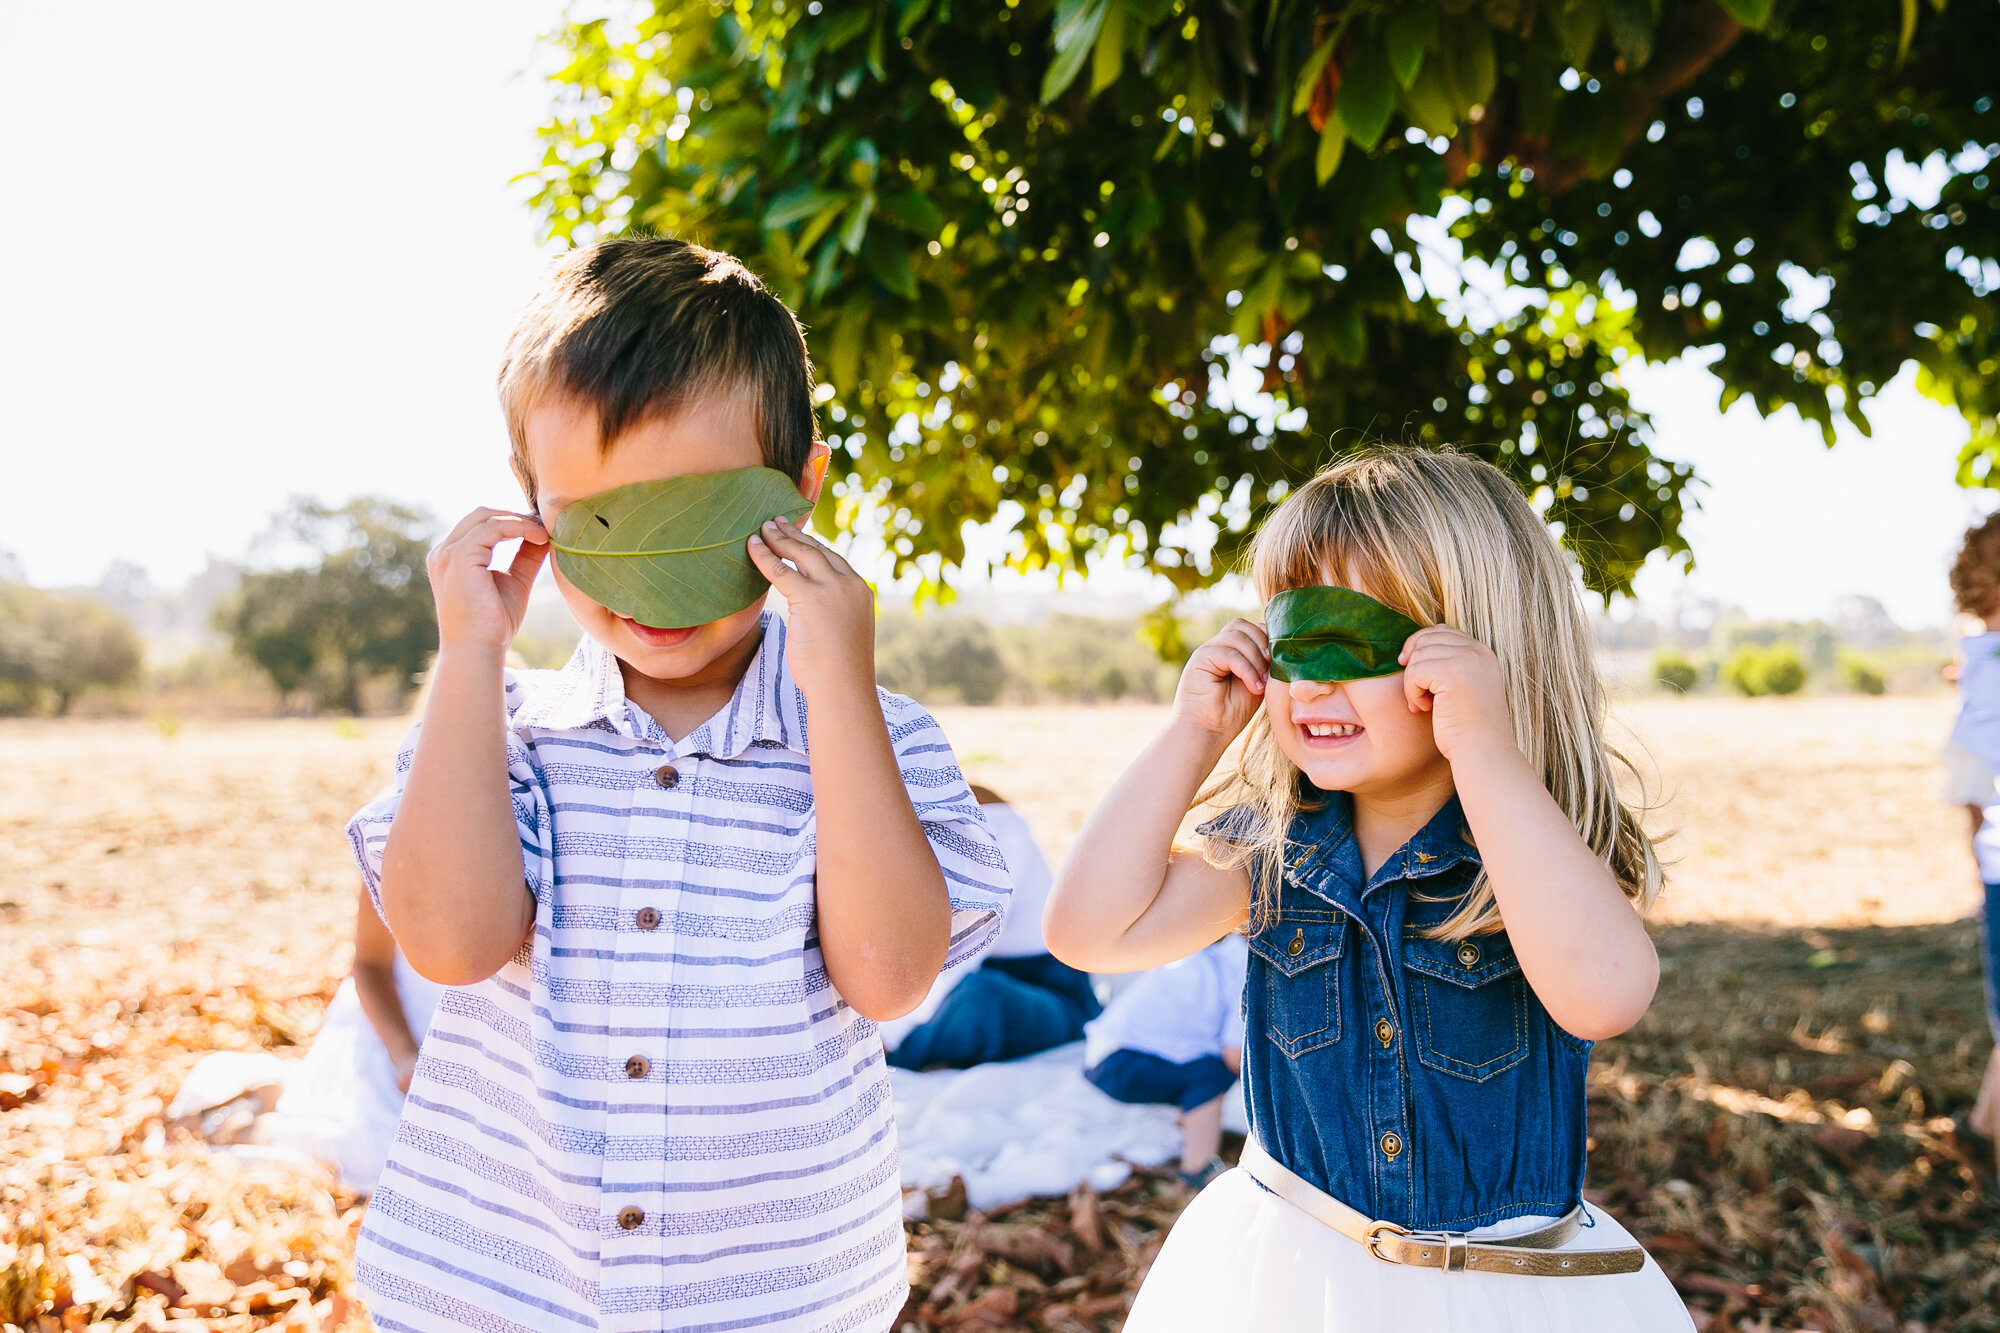 Los_Angeles_Family_Photography_Orange_County_Children_Babies_Field_Farm_Outdoors_Morning_Session_California_Girls_Boys_Kids_Photography-1268.jpg